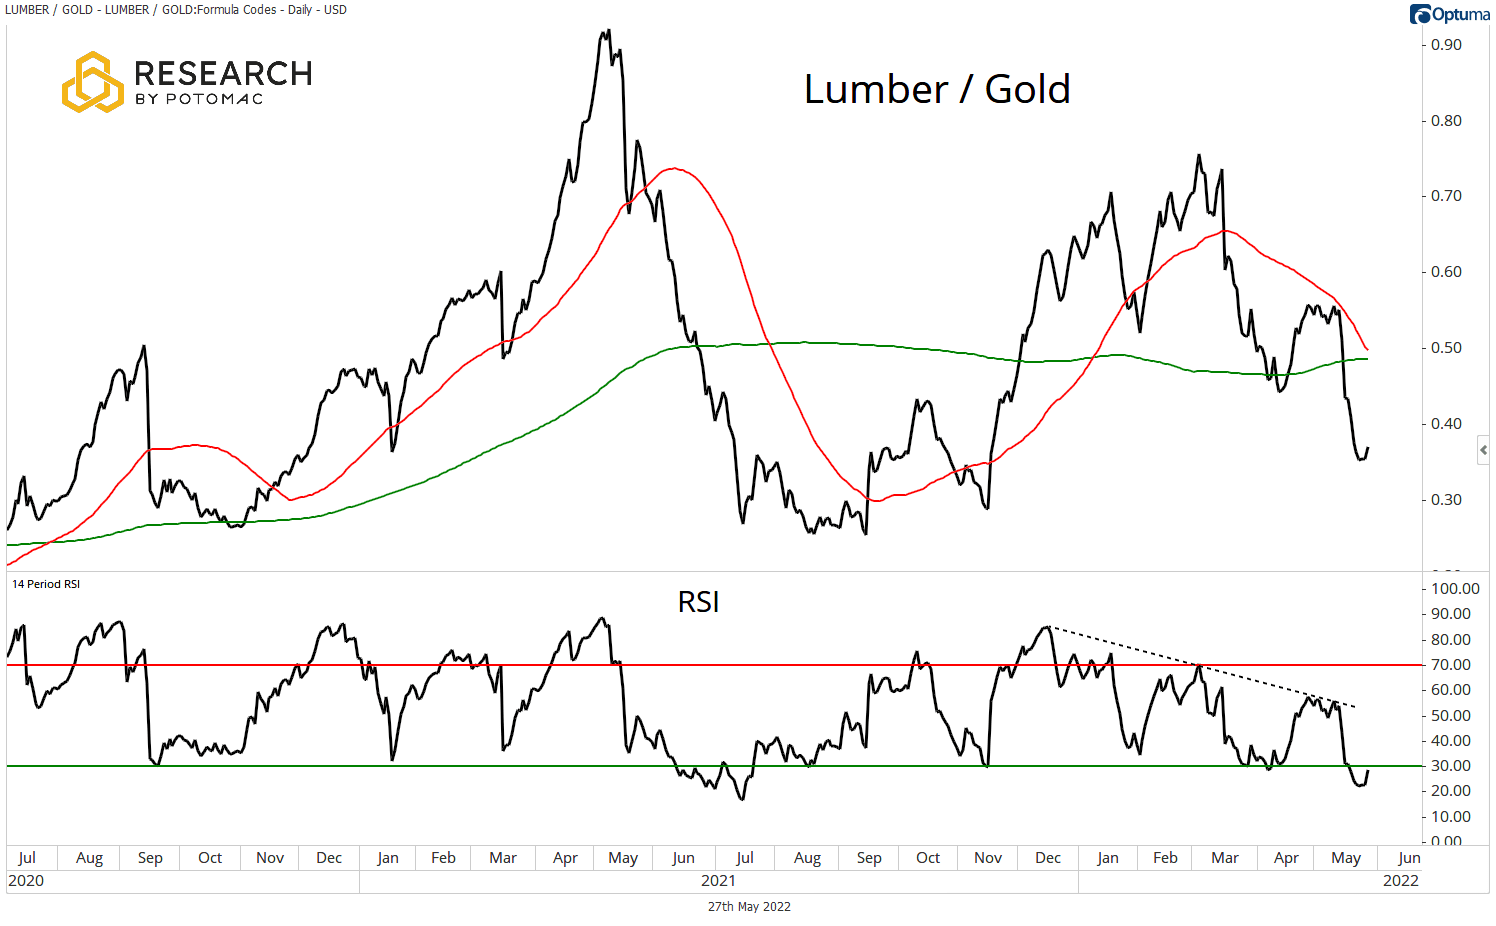 Lumber / Gold chart for March 25th research.